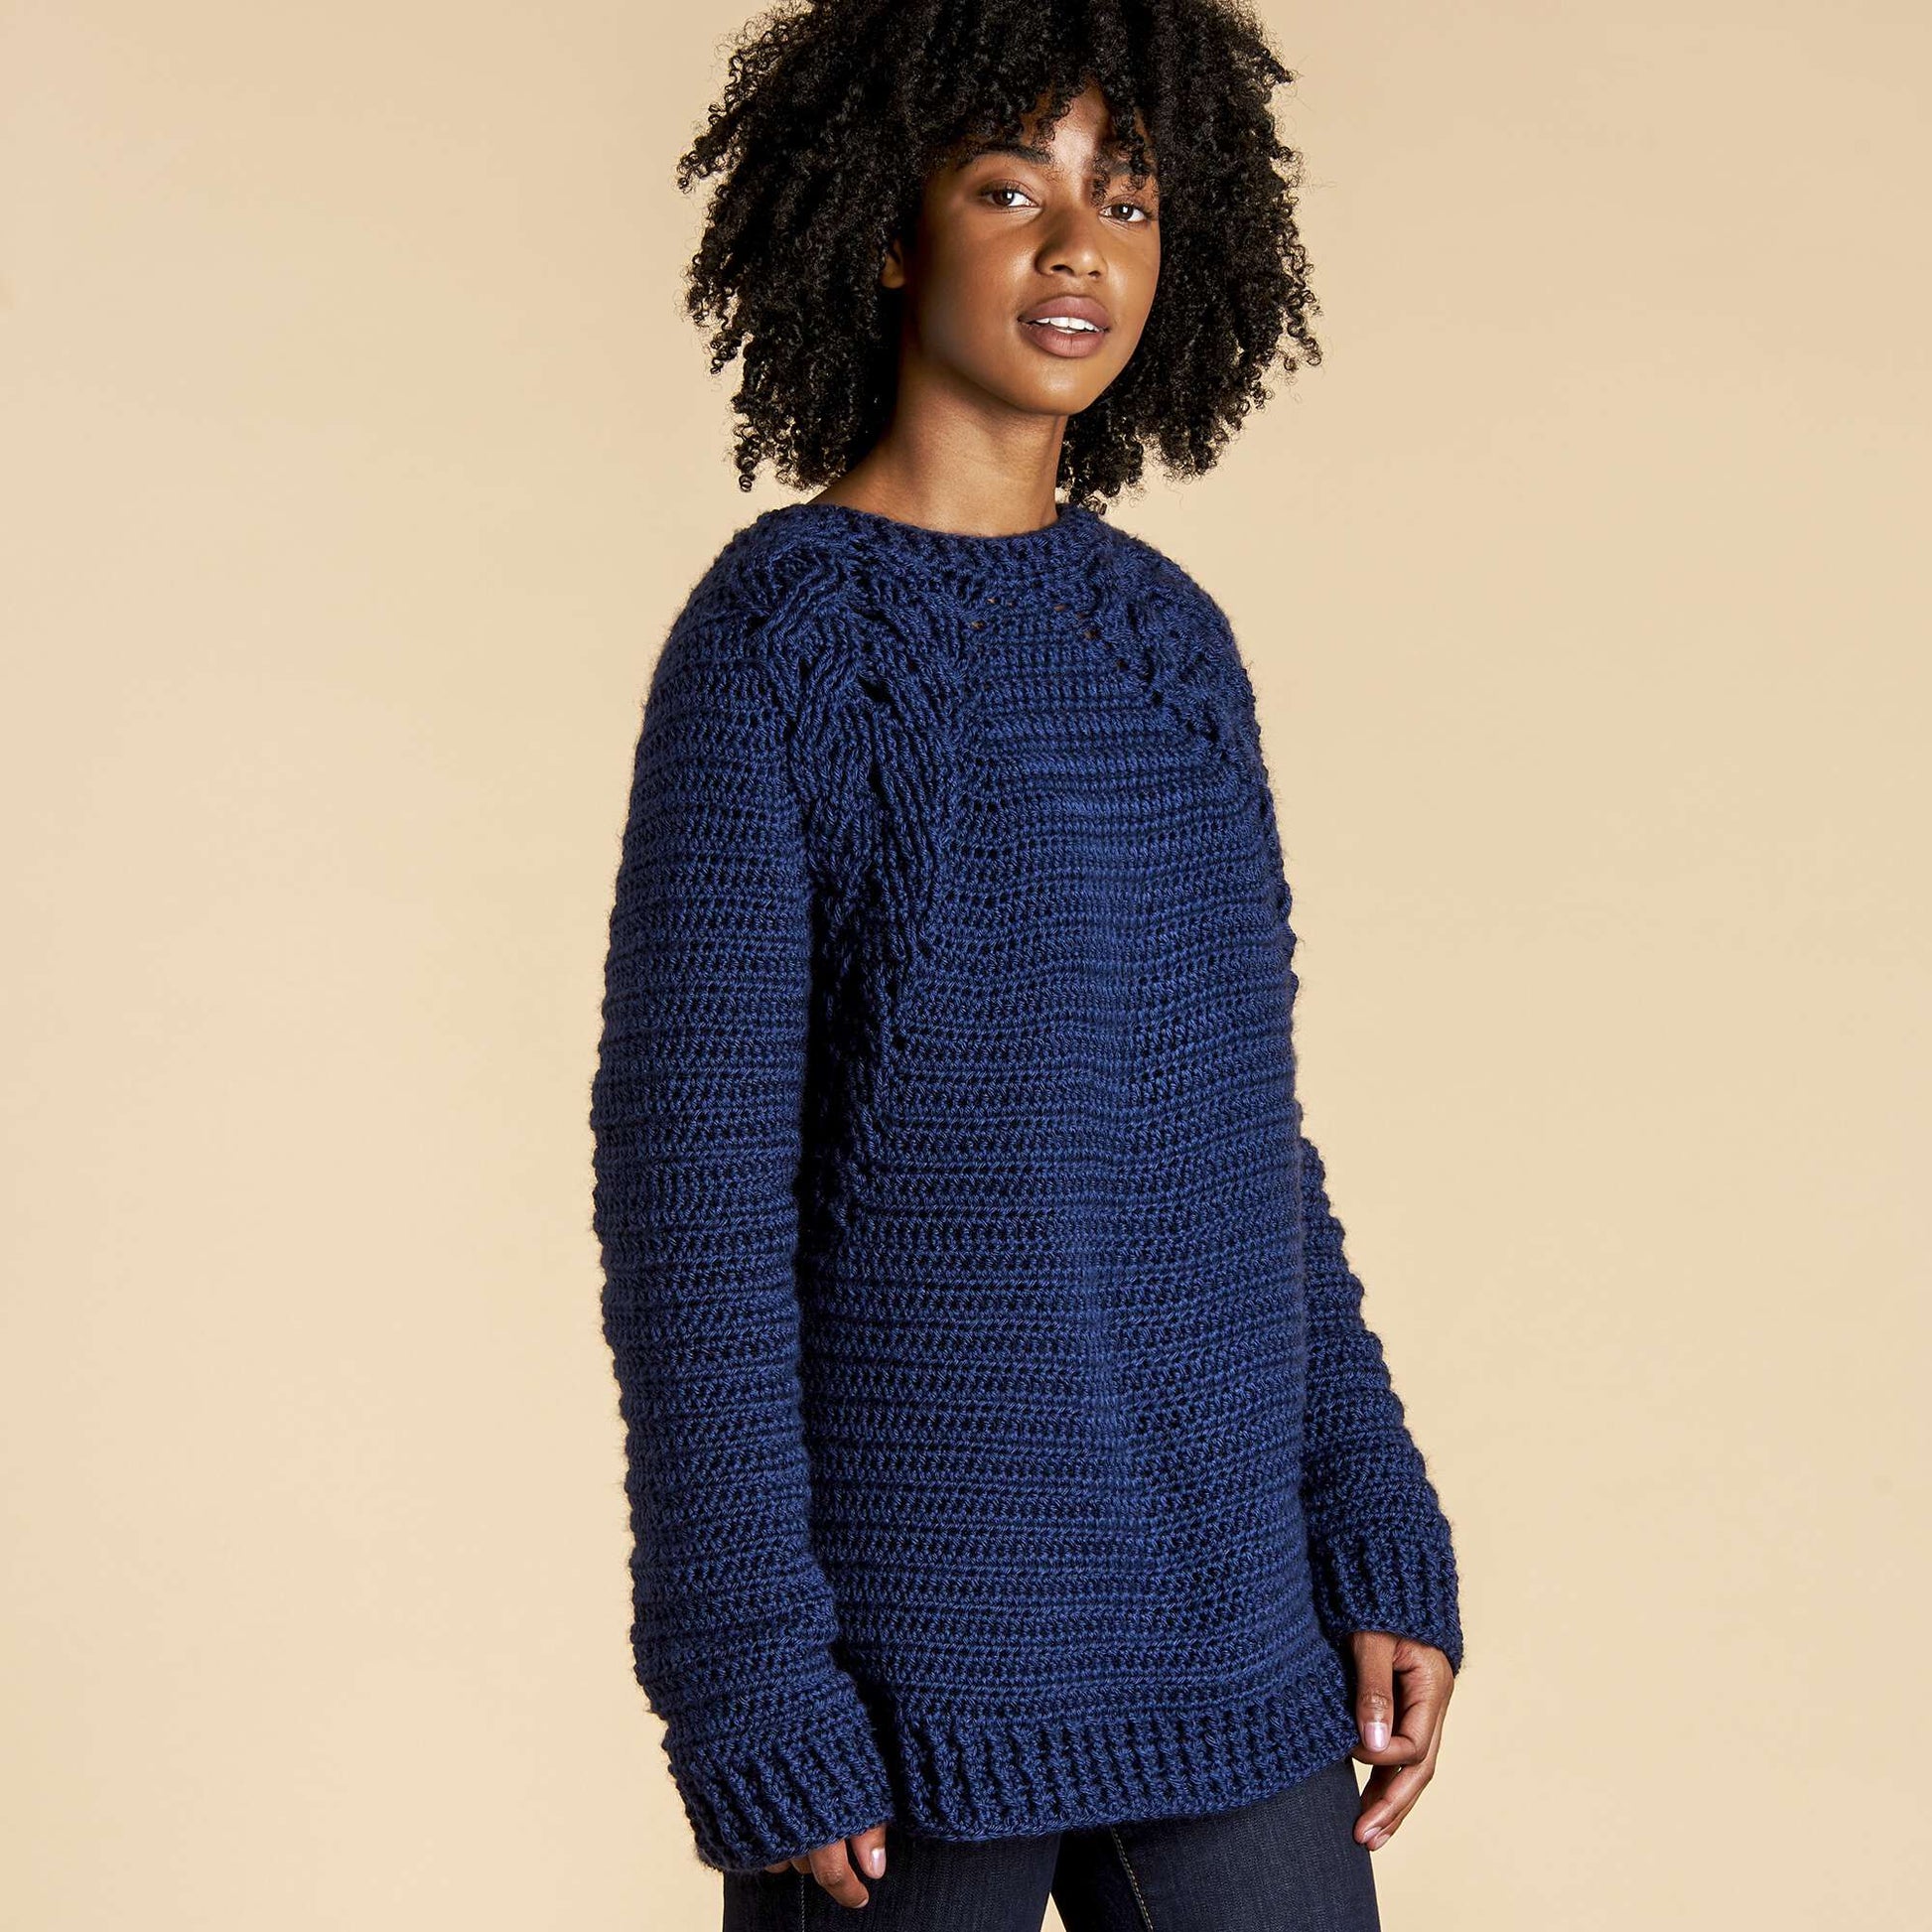 Caron Branching Out Crochet Pullover XS/S